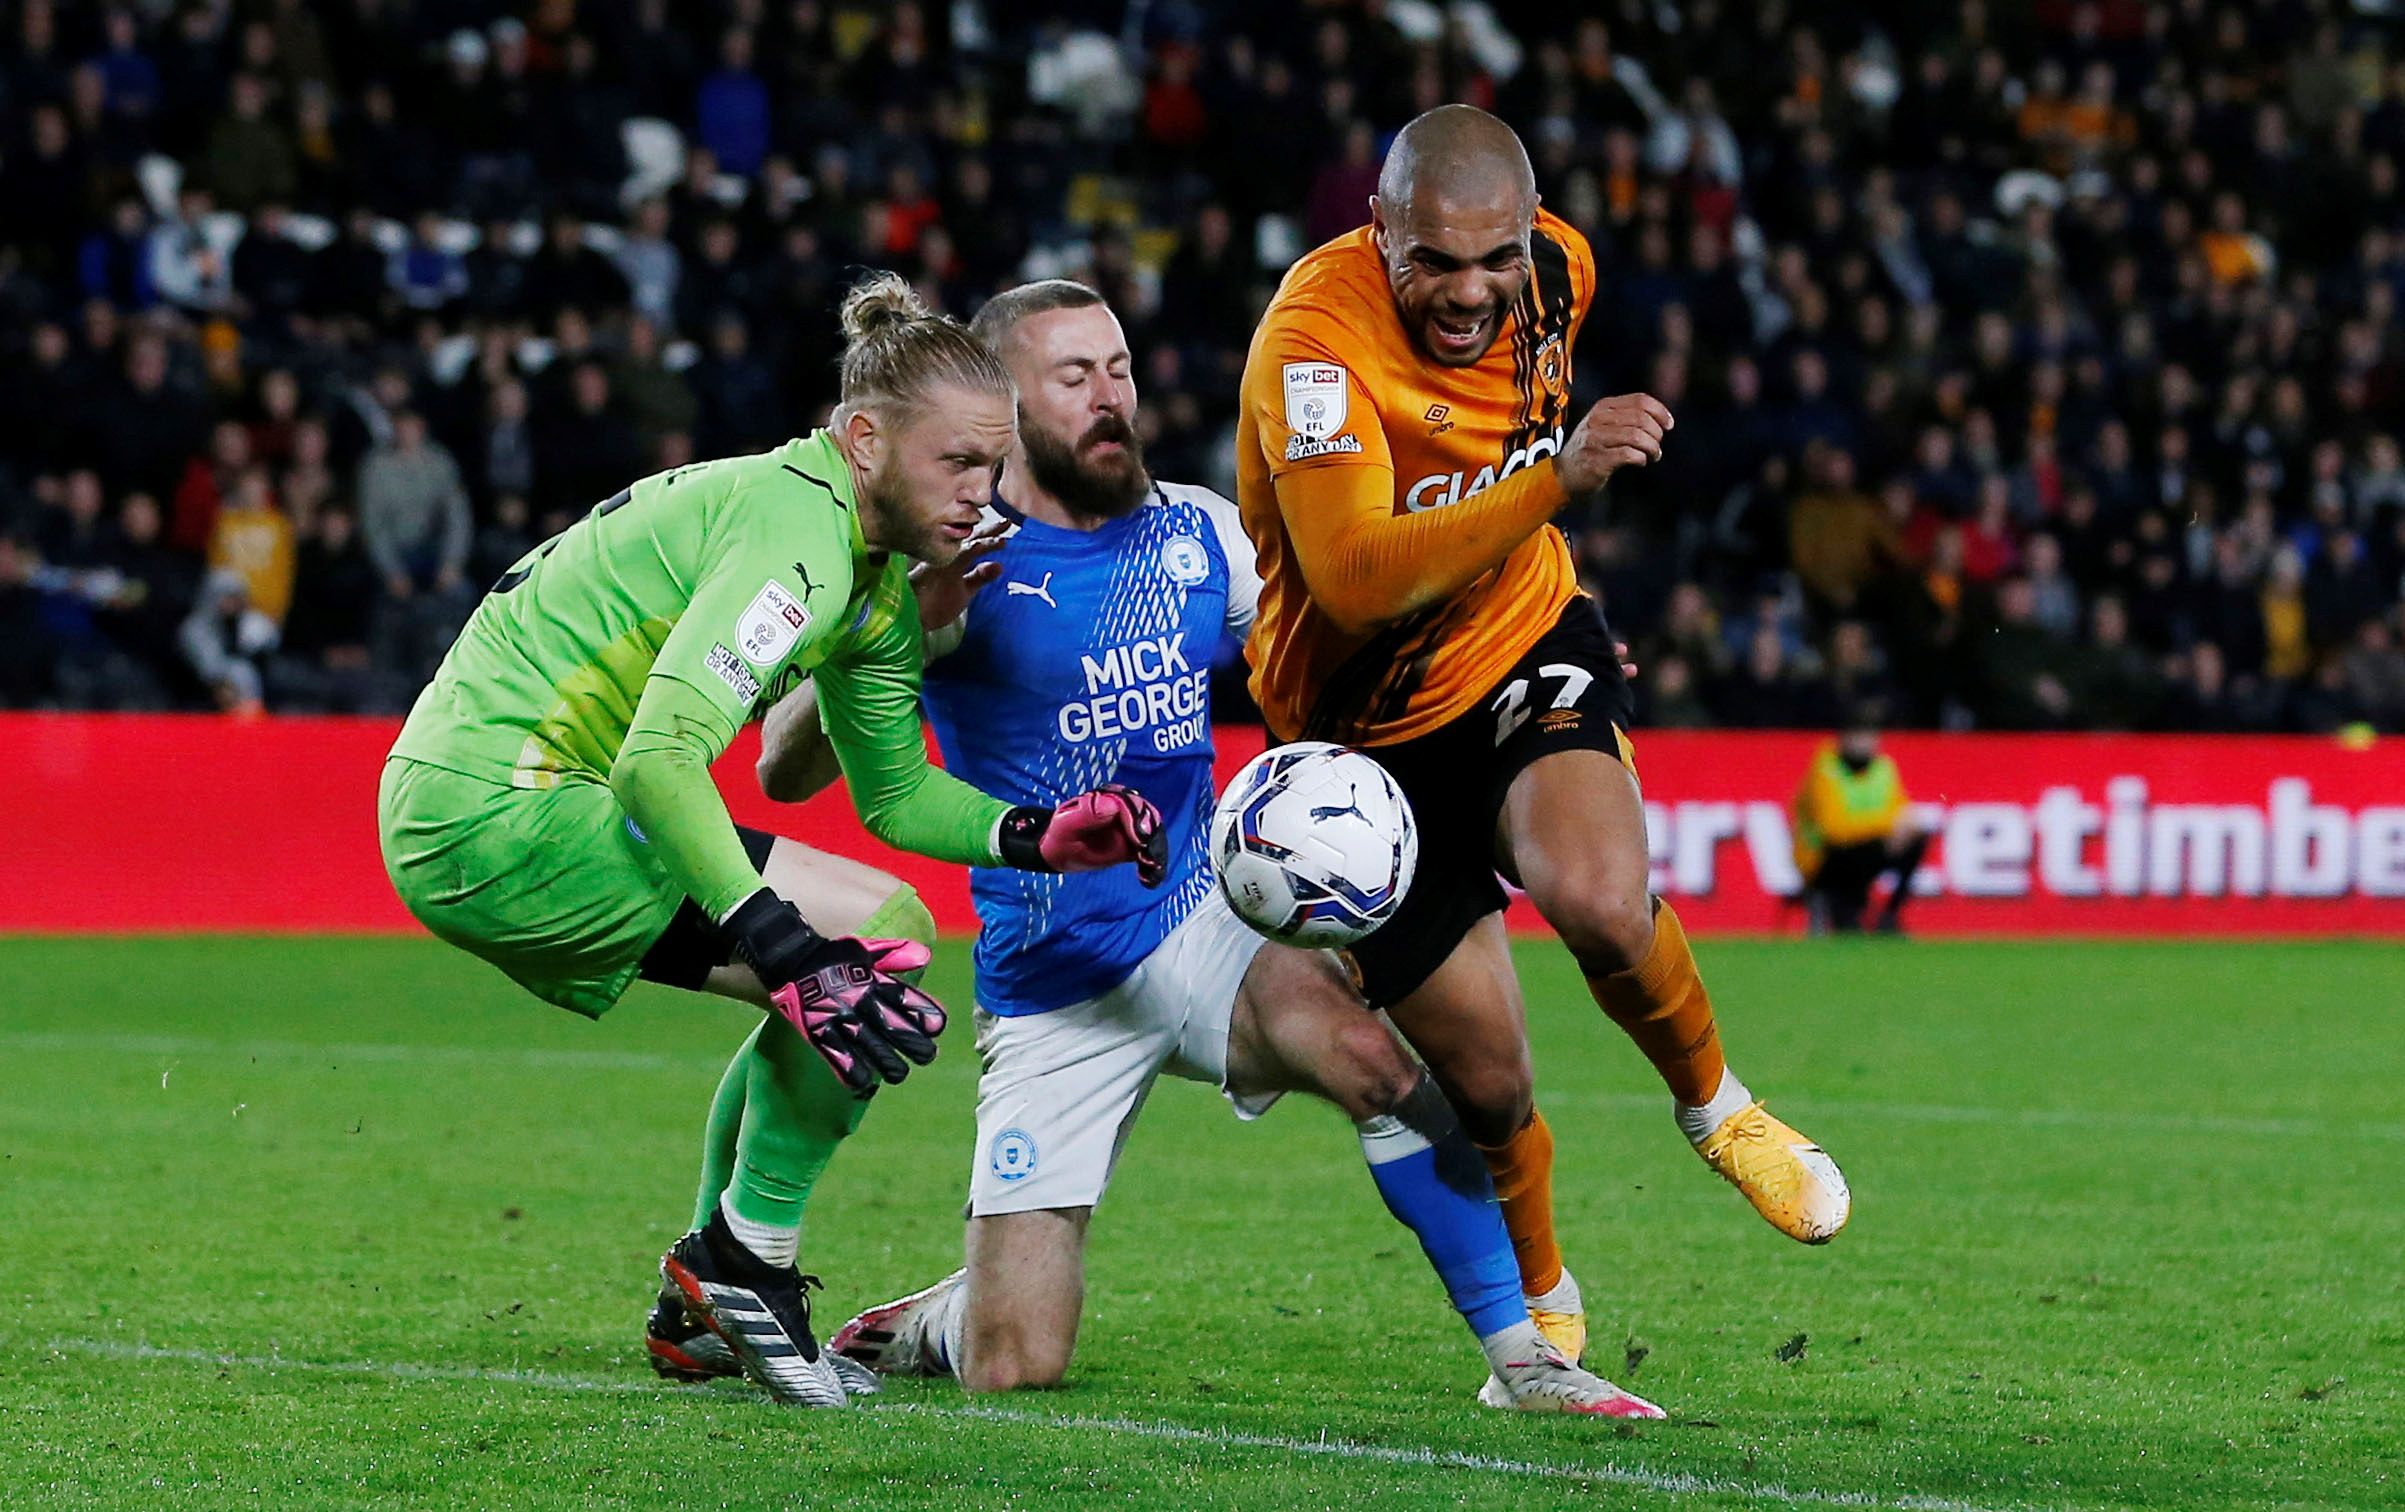 Soccer Football - Championship - Hull City v Peterborough United - KCOM Stadium, Hull, Britain - October 20, 2021  Hull City's Josh Magennis is denied a penalty after this challenge by Peterborough United's Dan Butler  Action Images/Craig Brough  EDITORIAL USE ONLY. No use with unauthorized audio, video, data, fixture lists, club/league logos or 